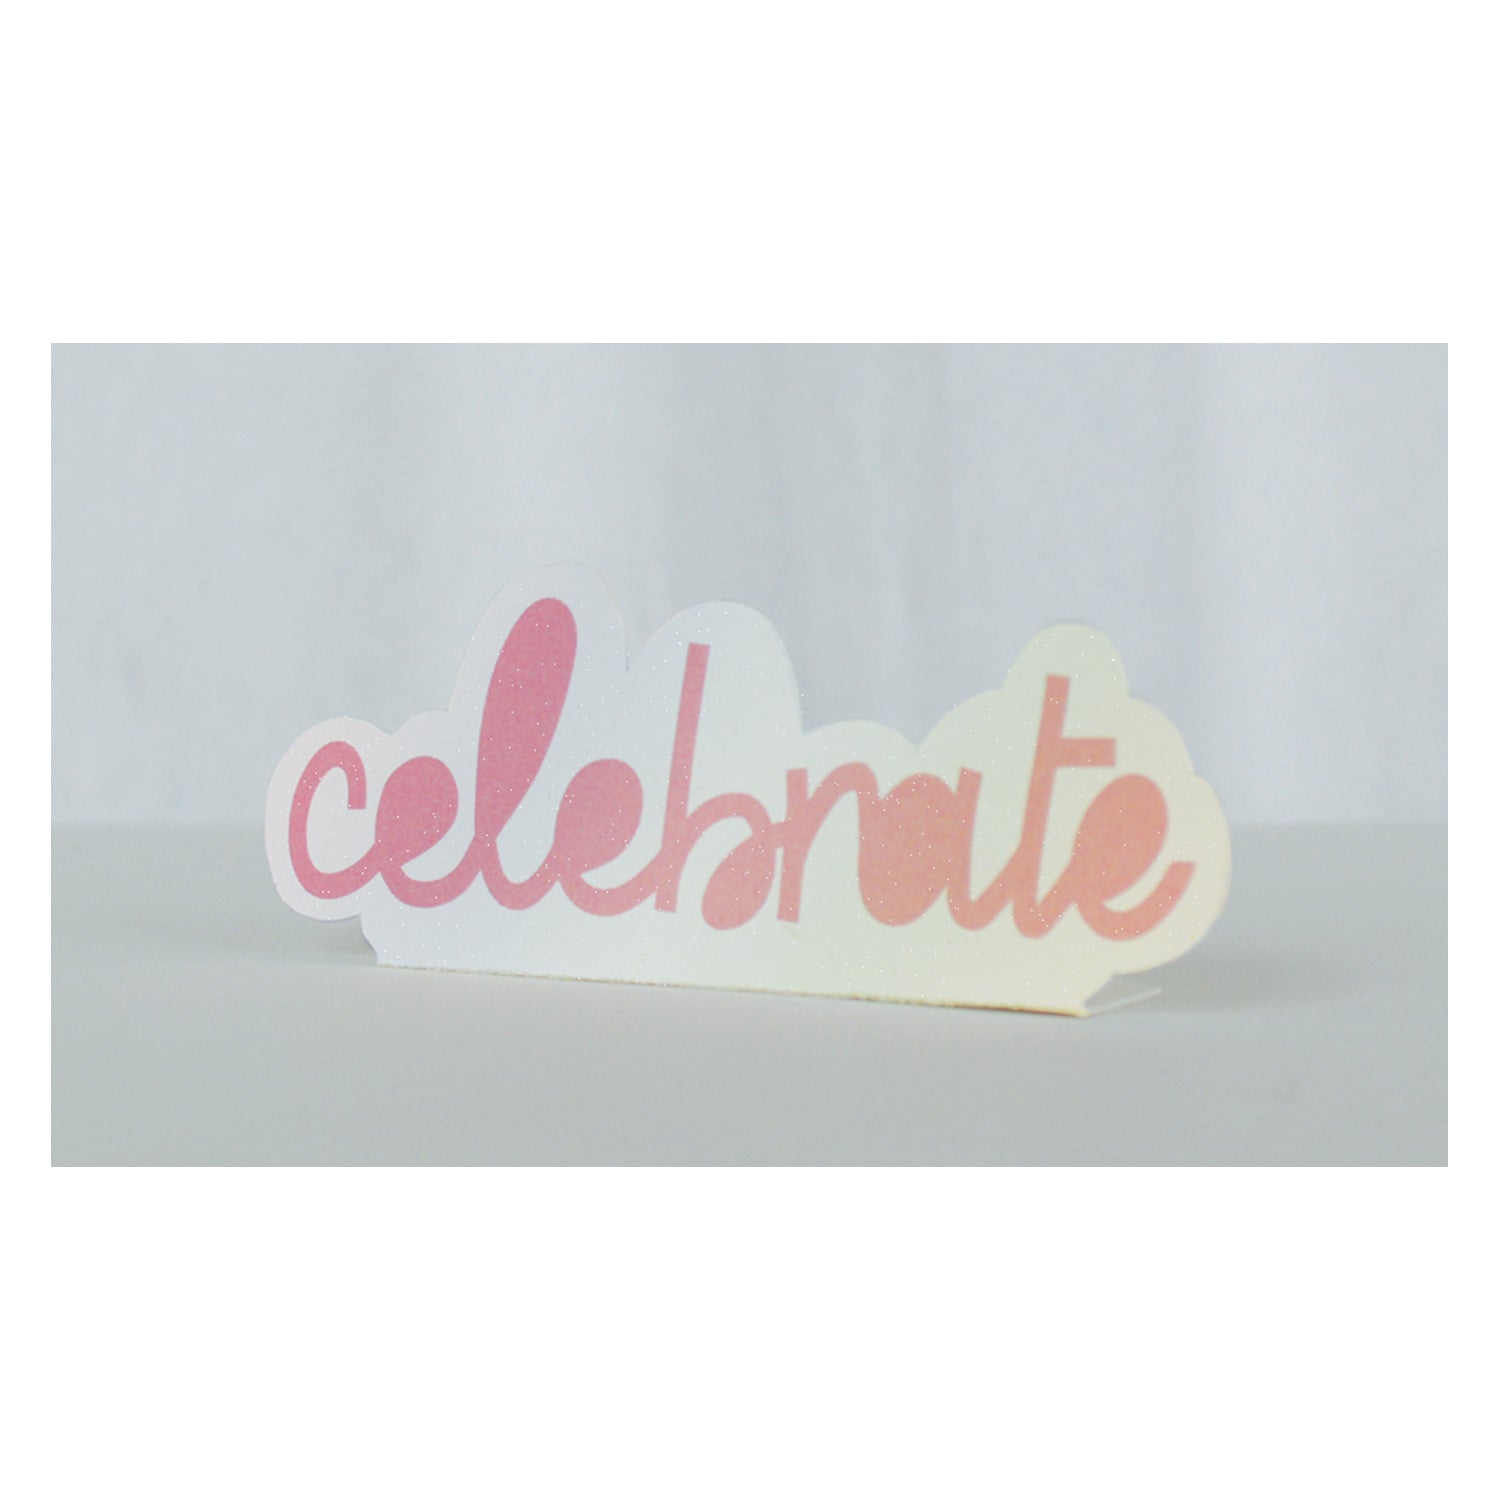 Decorative &quot;Hester &amp; Cook Celebrate Pop Up Tag&quot; with script font displayed against a plain background.